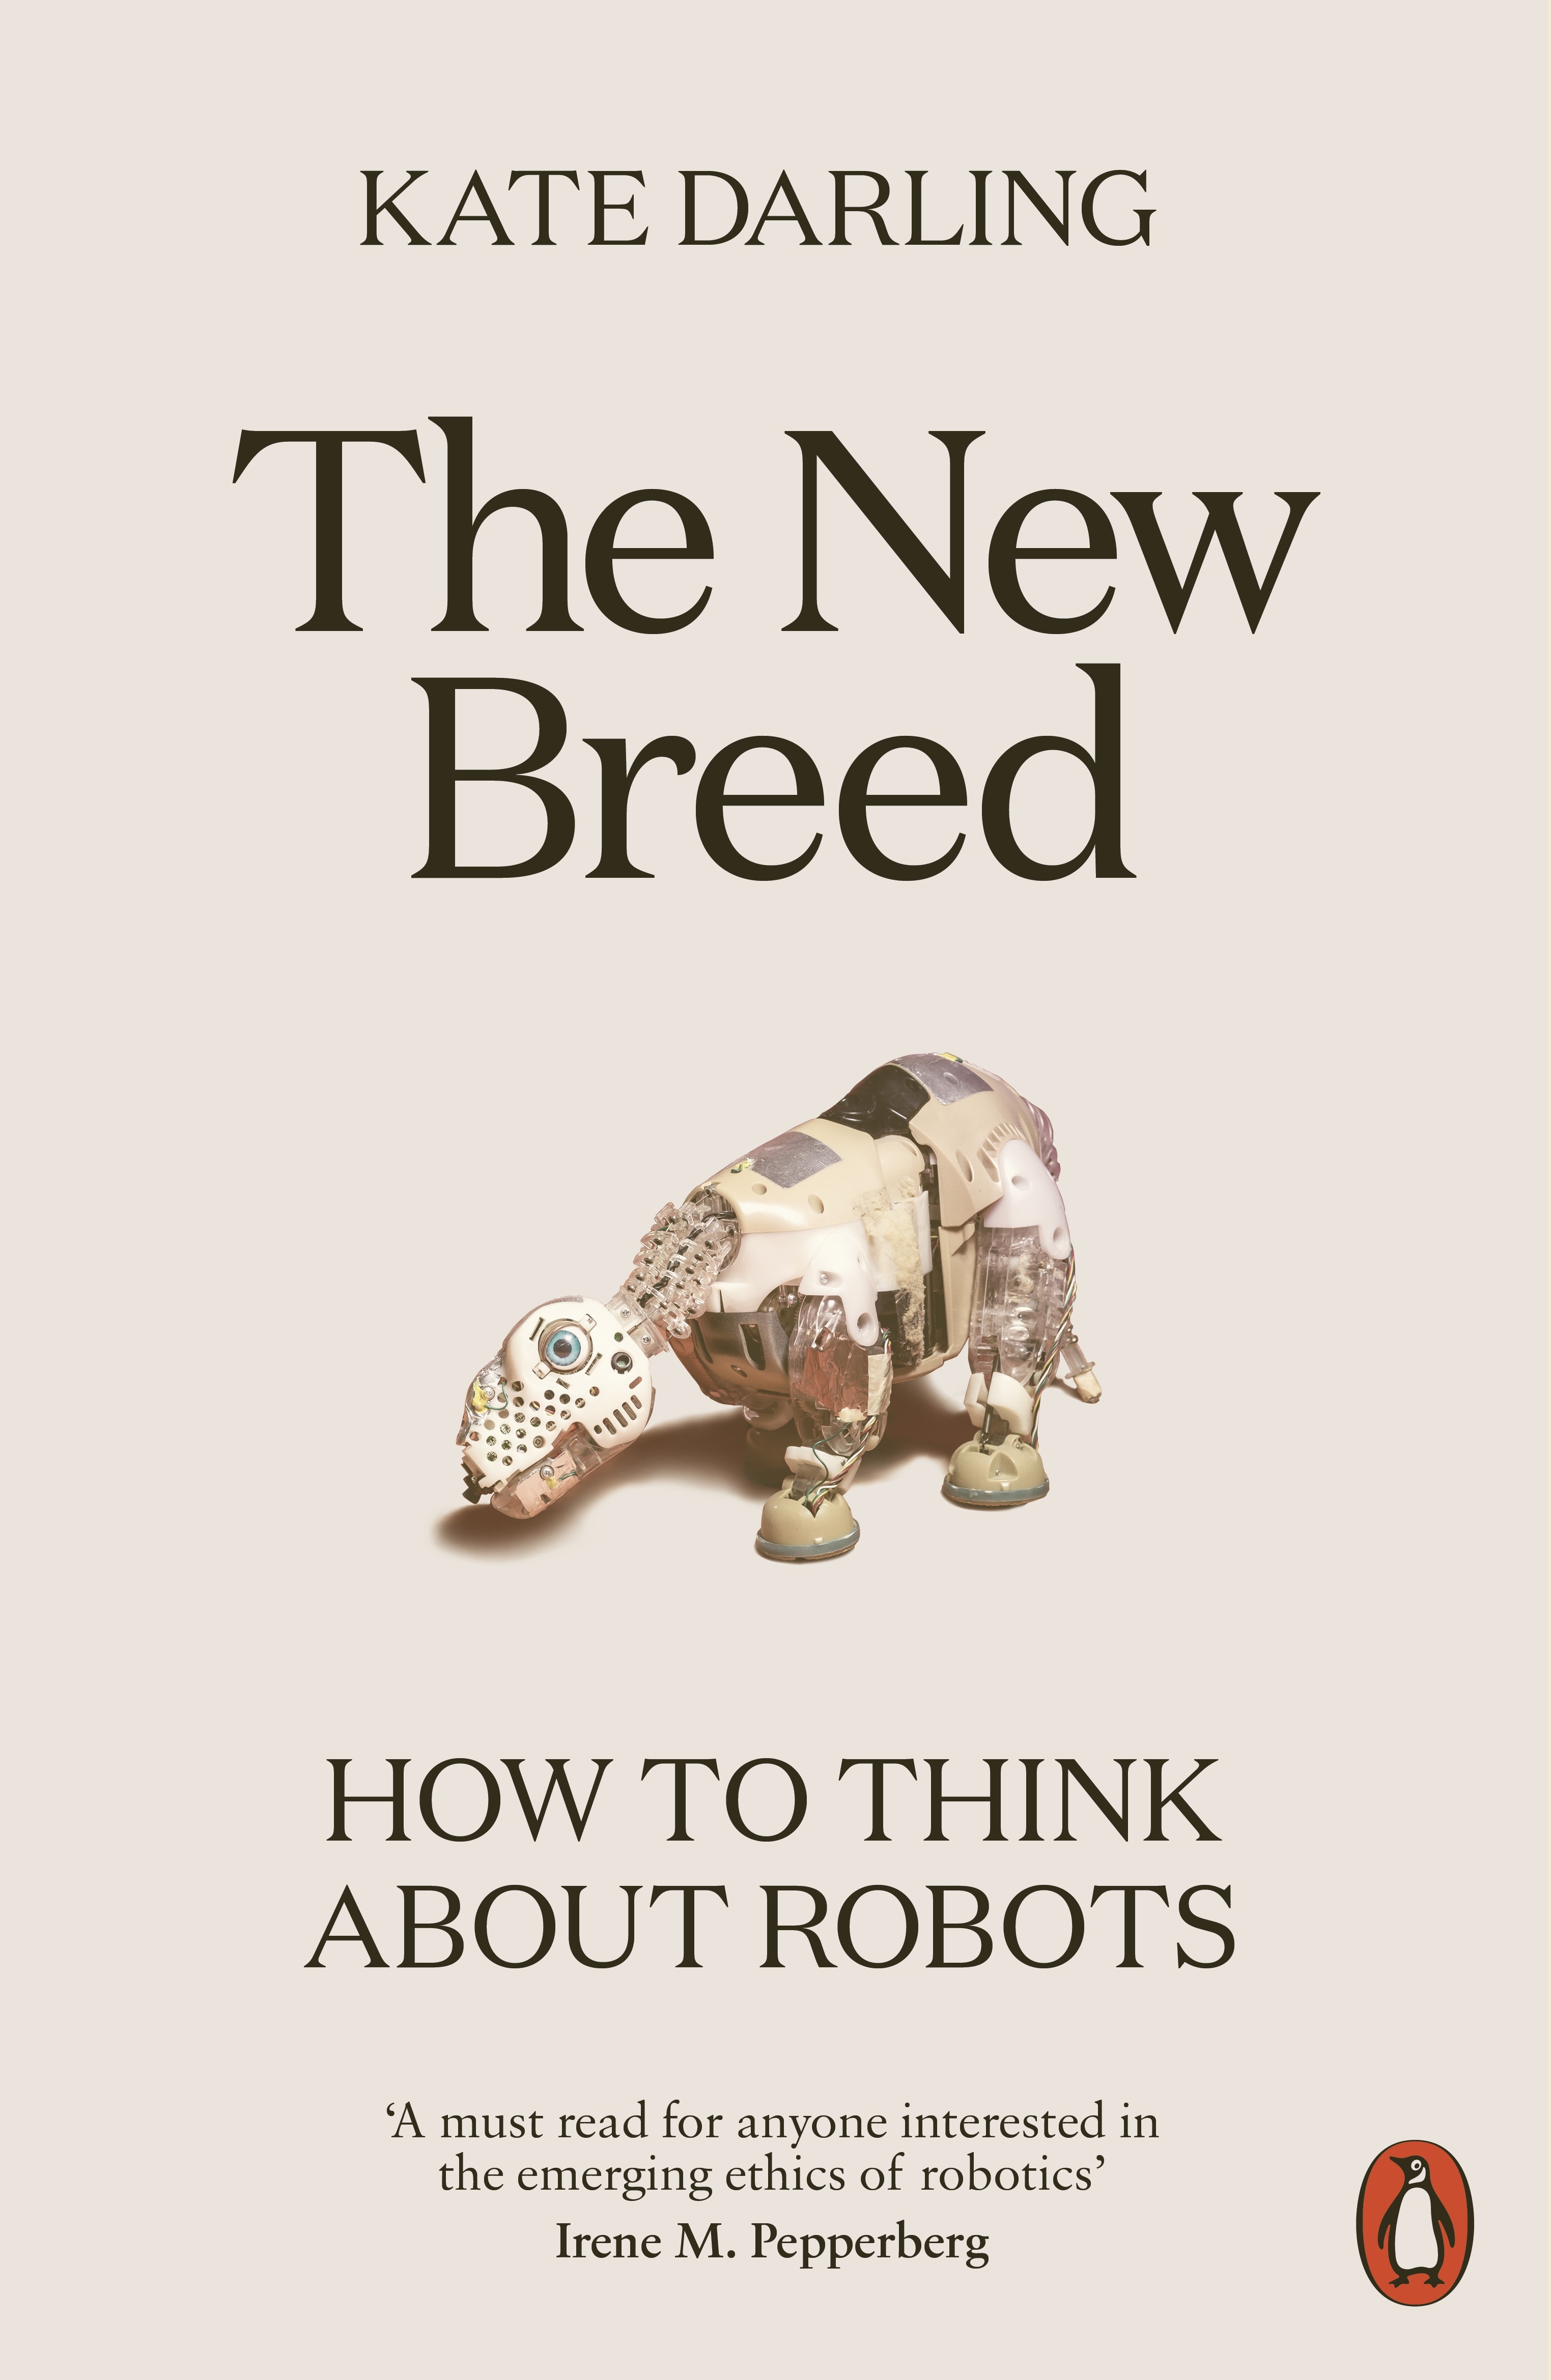 Book “The New Breed” by Kate Darling — August 4, 2022